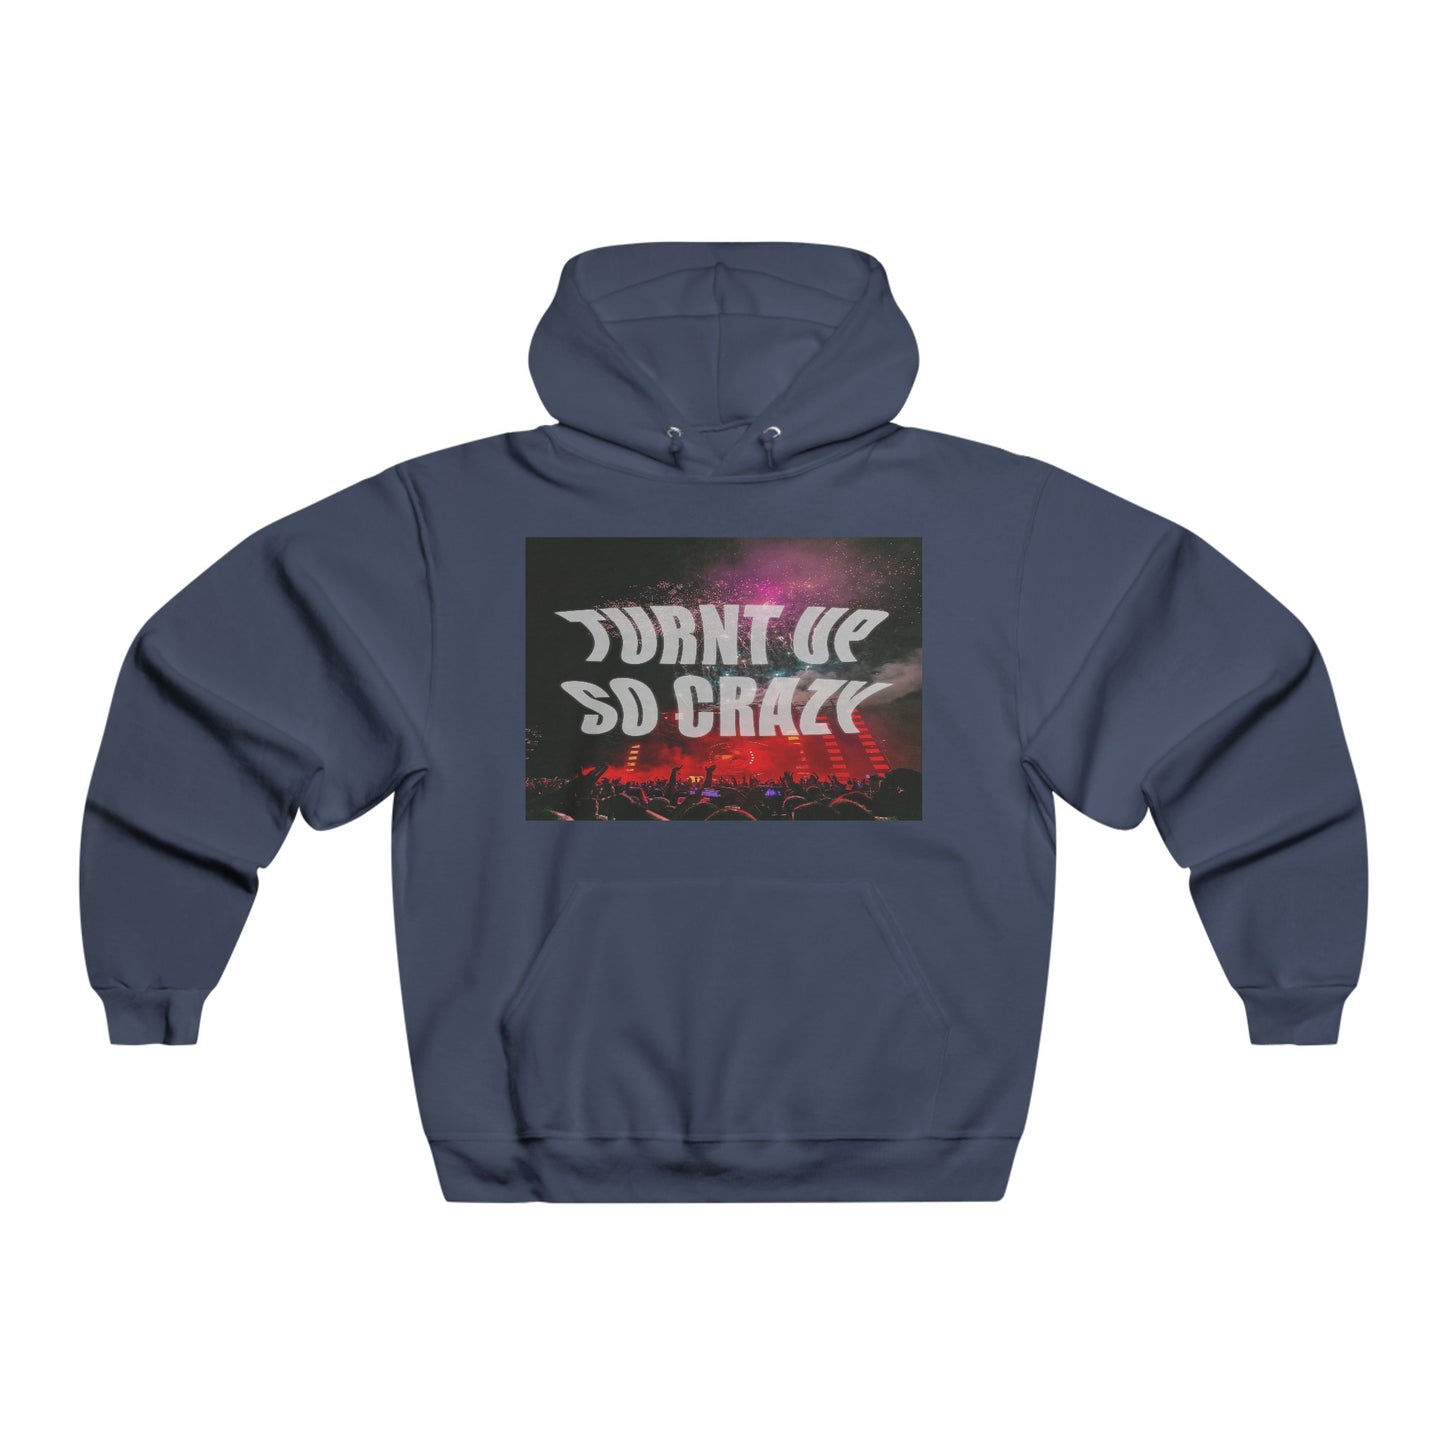 Turnt Up So Crazy Graphic Hoodie